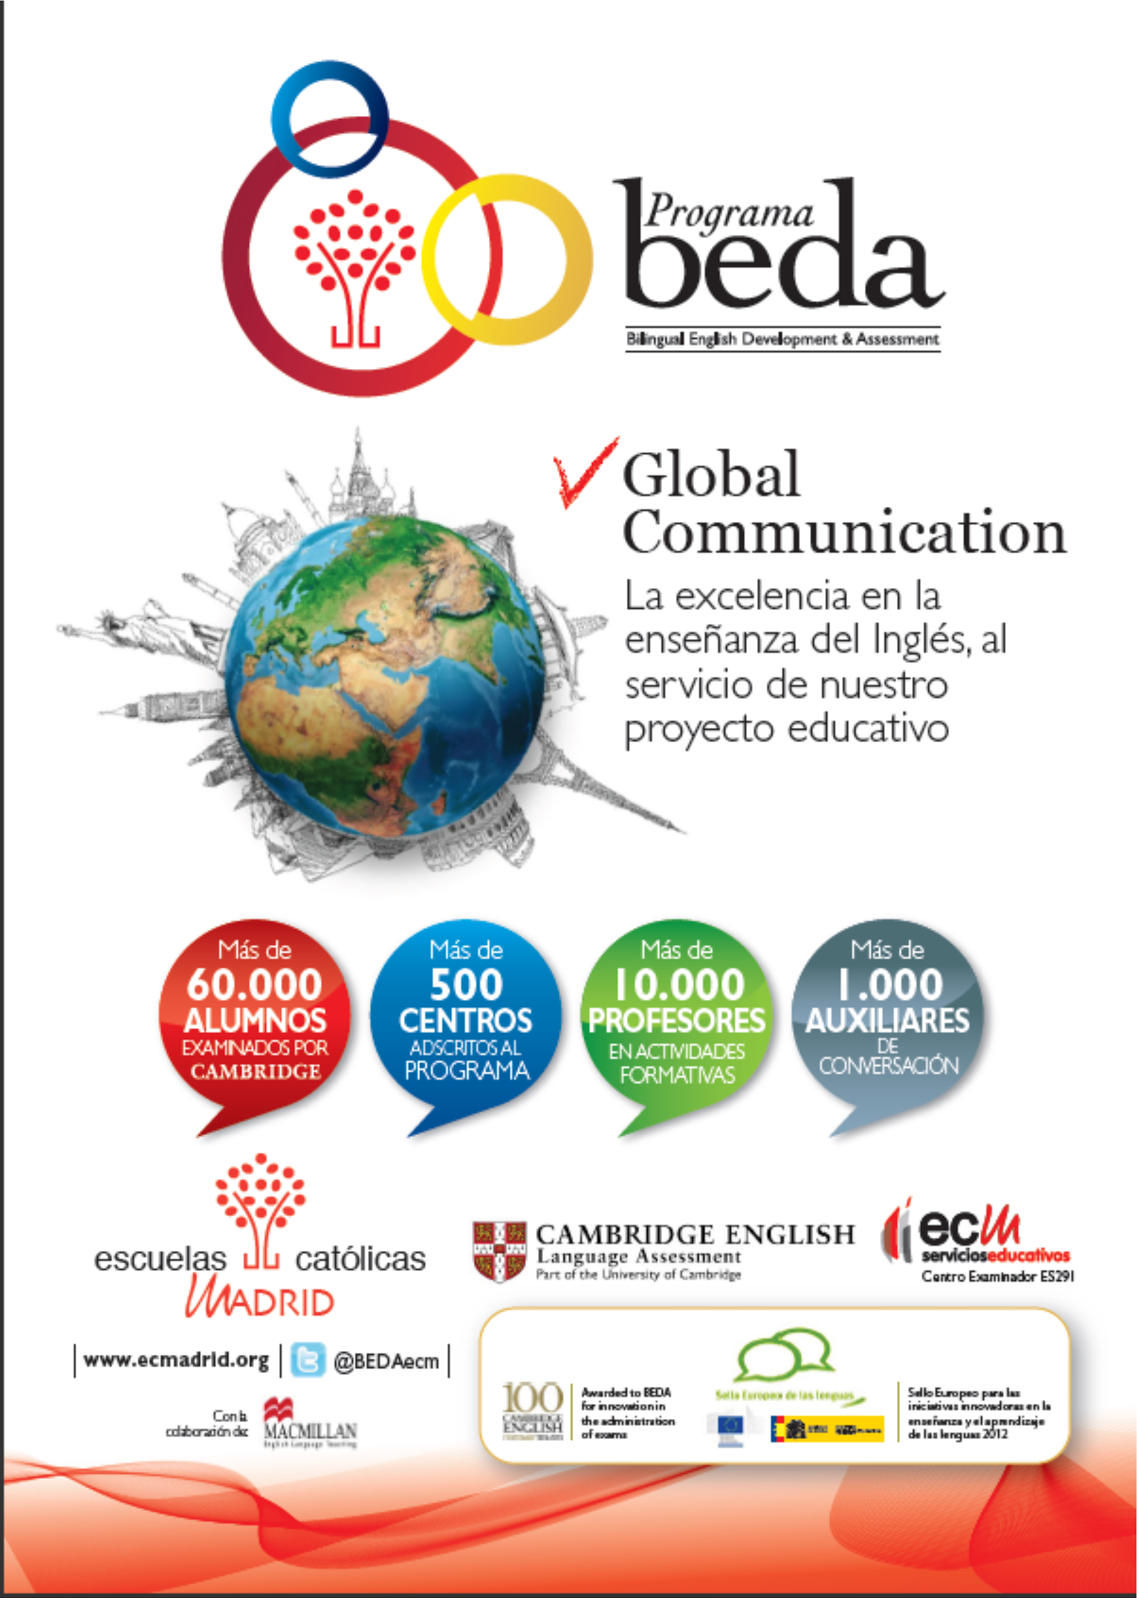 BEDA PROJECT